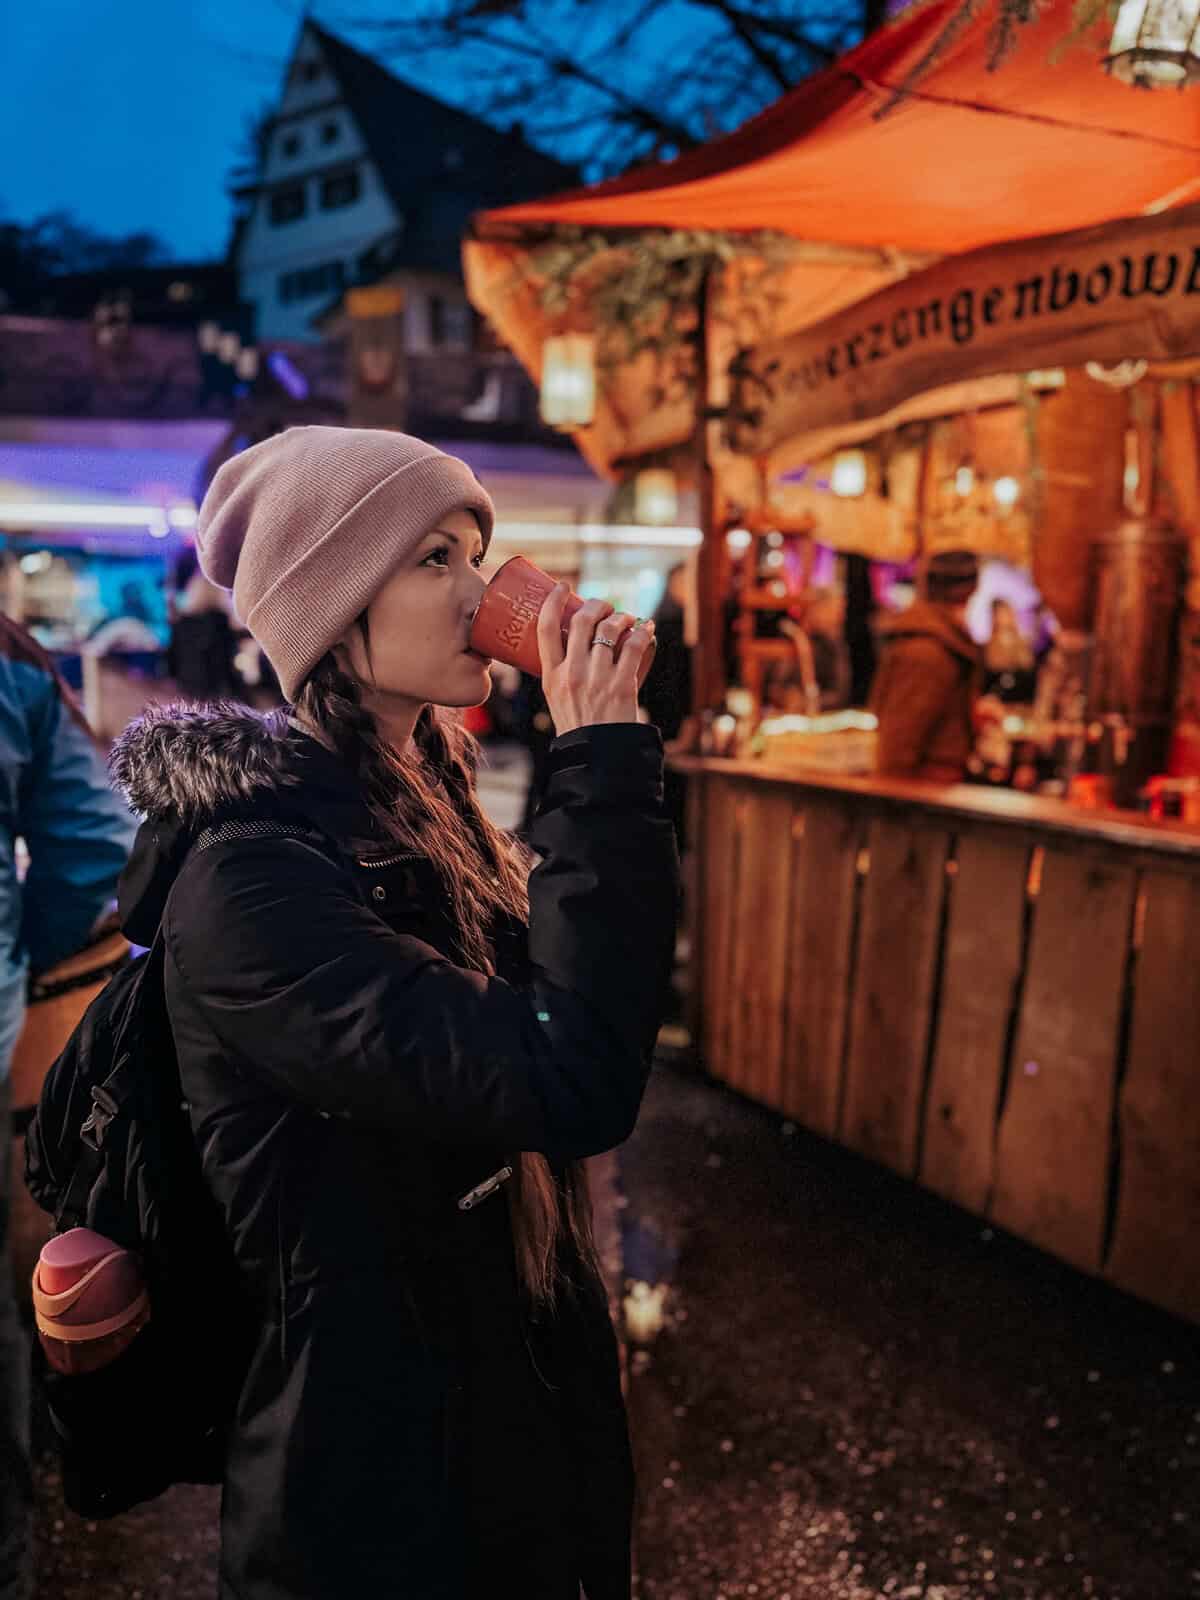 a woman enjoying a cup of mulled wine, with market stalls and festive lights in the background.